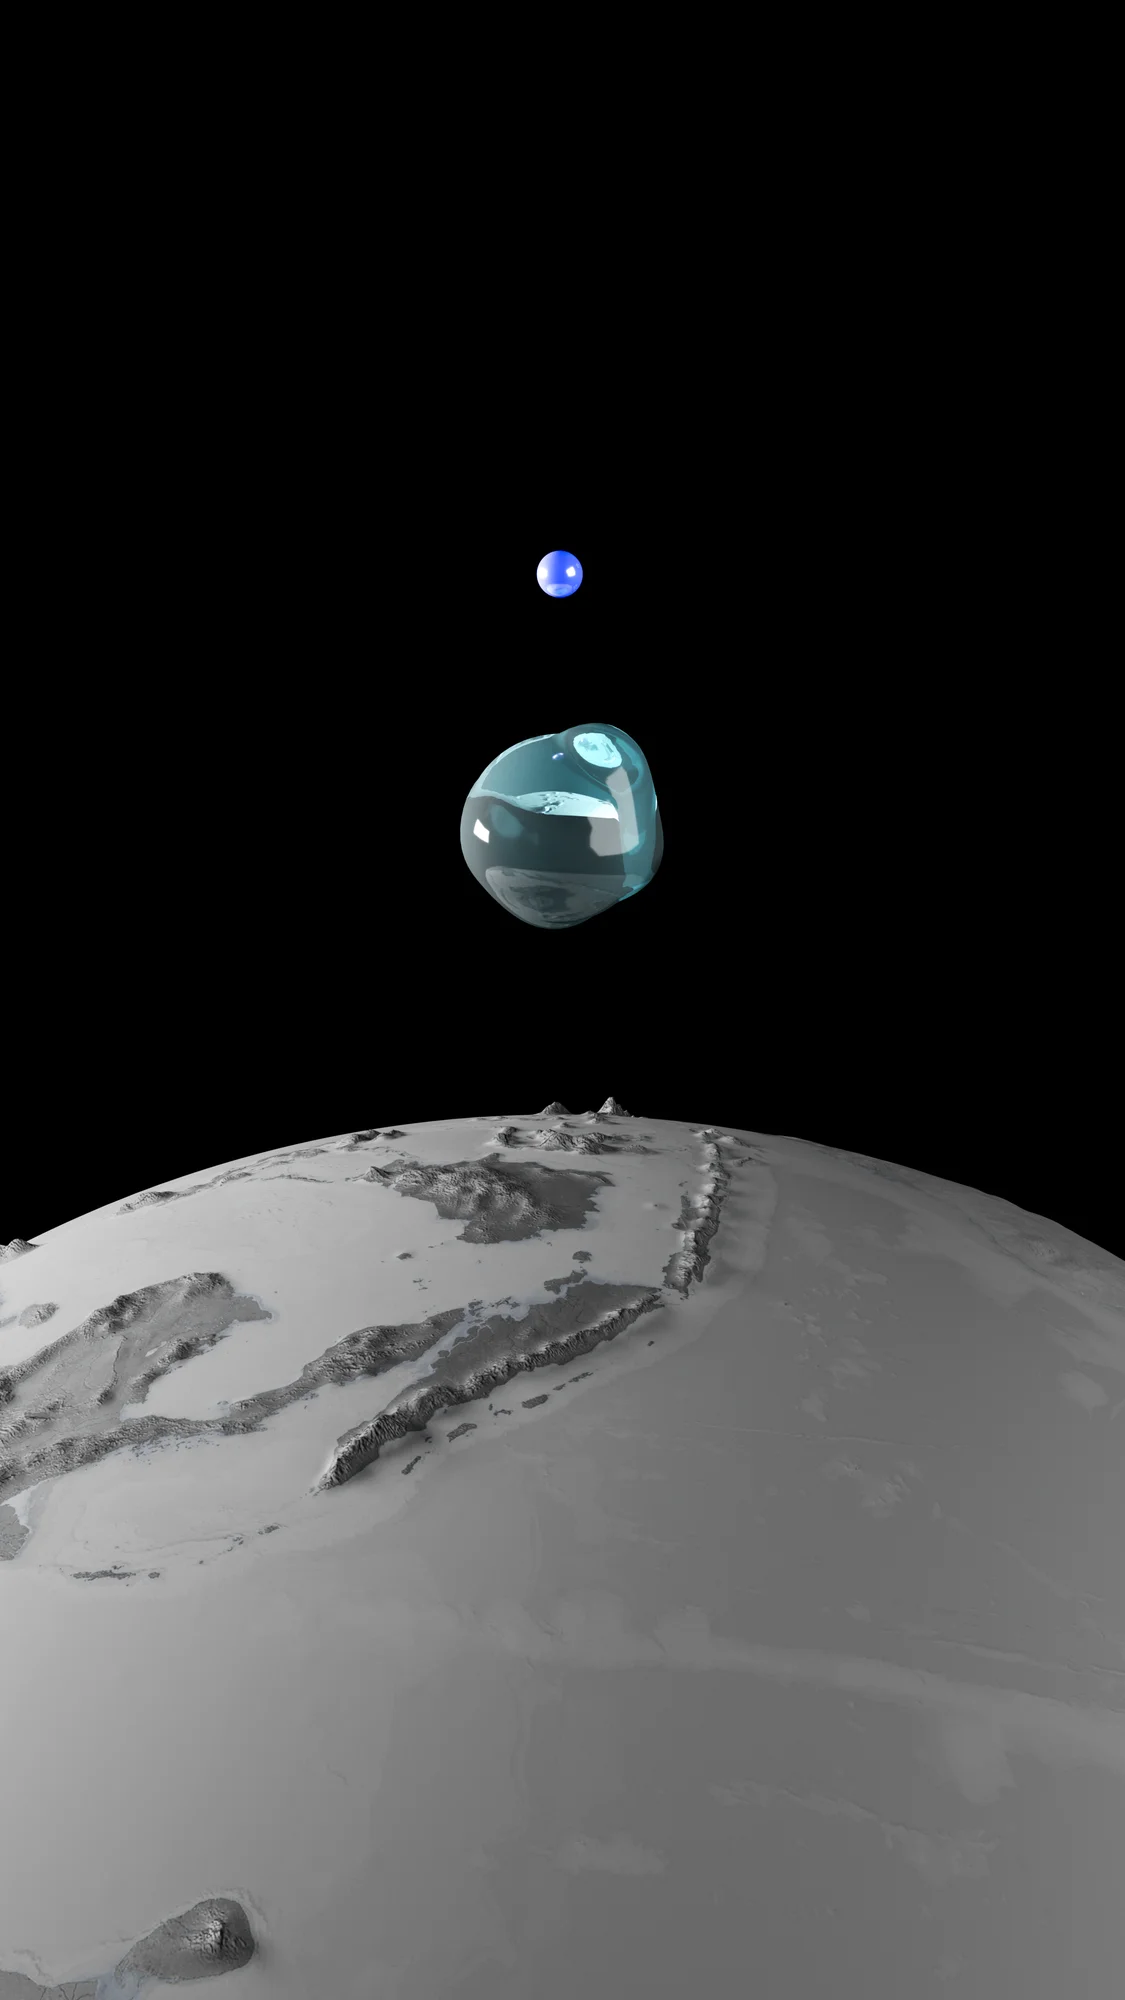 A graphic showing three spheres depicting earth, the amount of water and the amount of fresh water